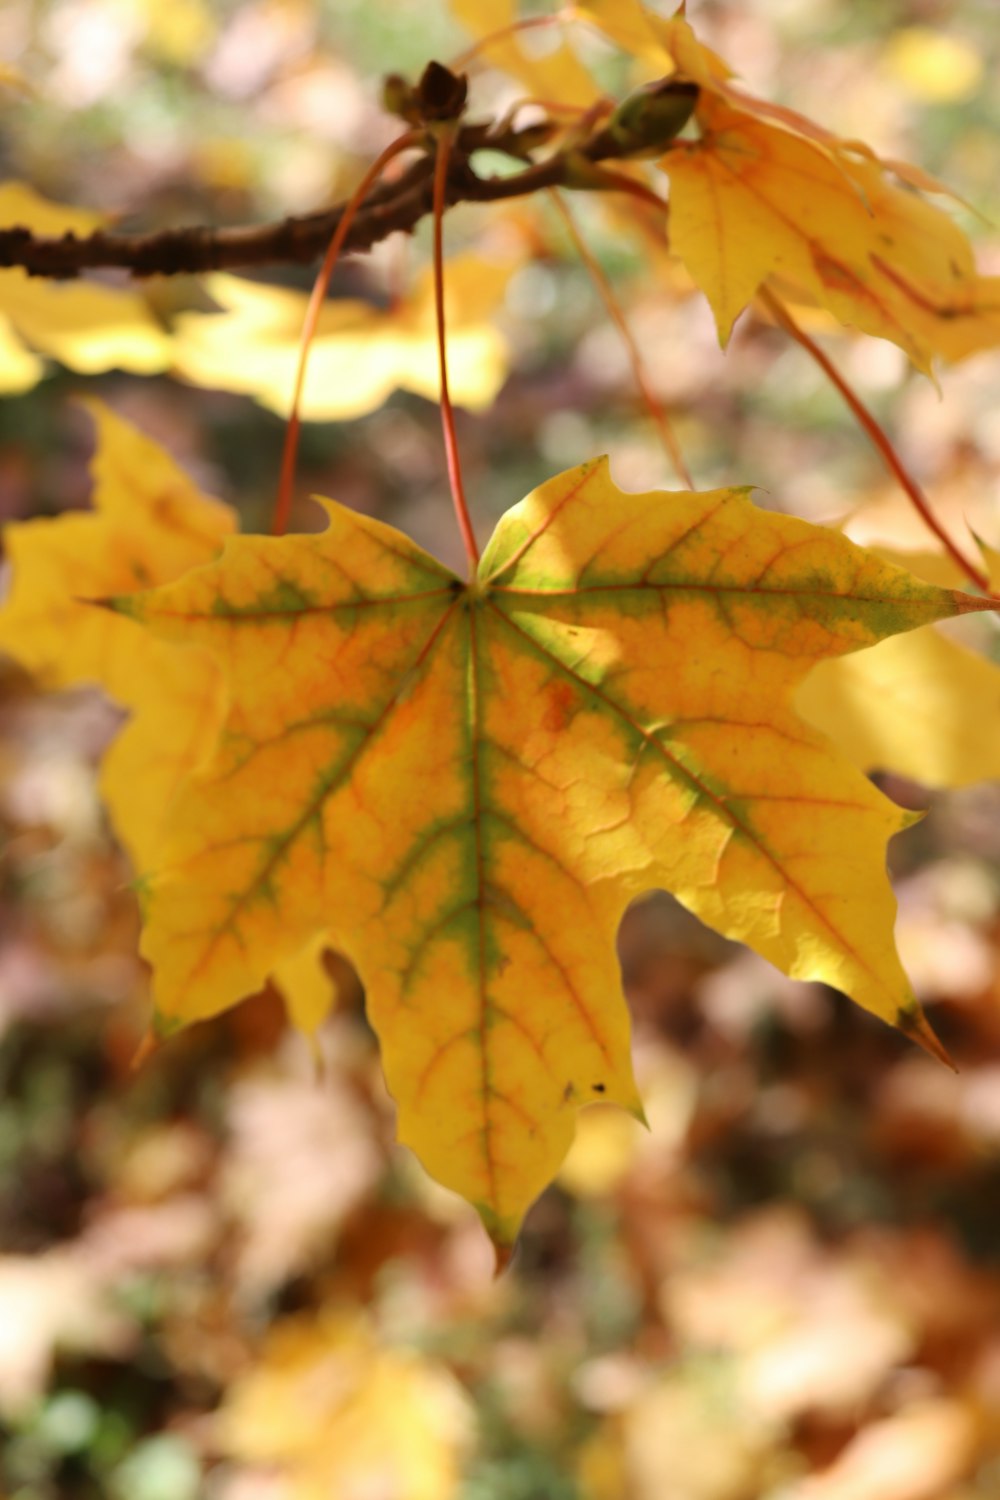 a yellow leaf hanging from a tree branch